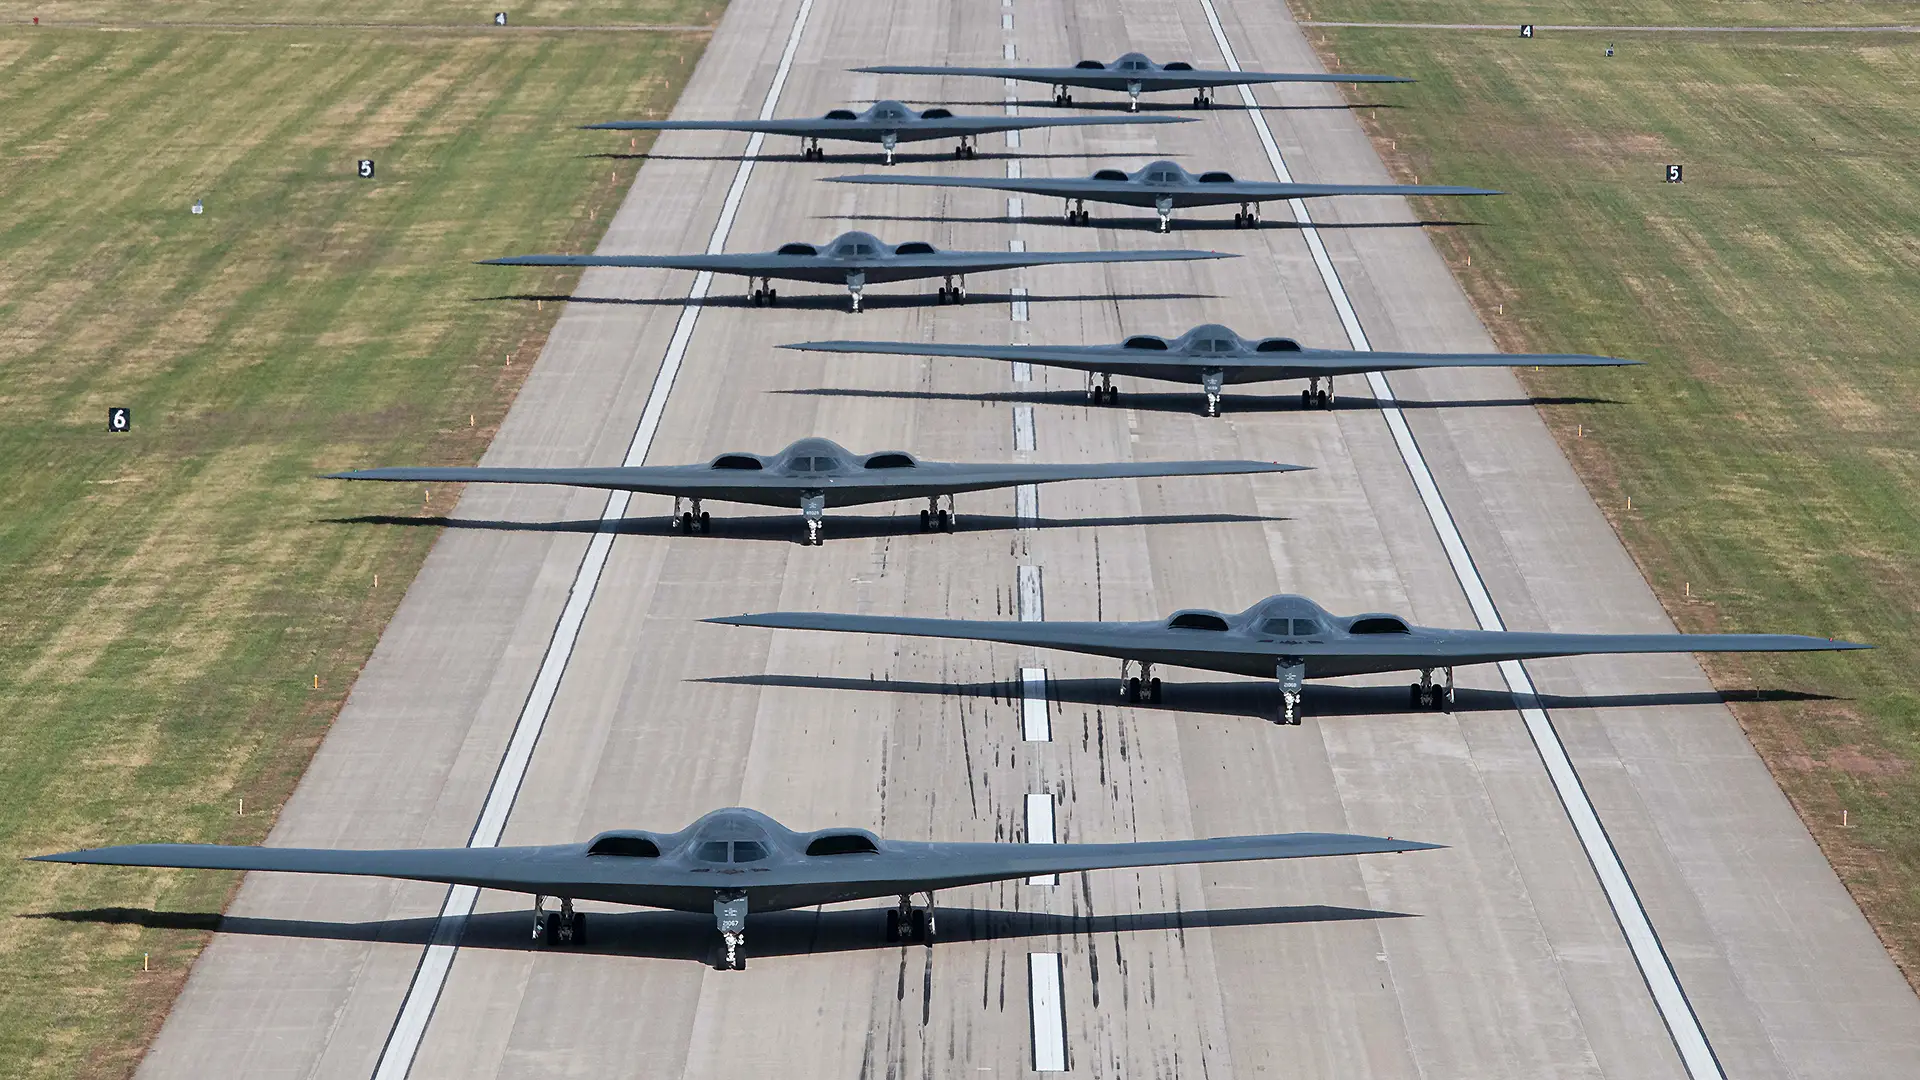 The U.S. has lifted 40% of its fleet of B-2 Spirit nuclear bombers into the sky at the same time, at a cost of more than $2 billion